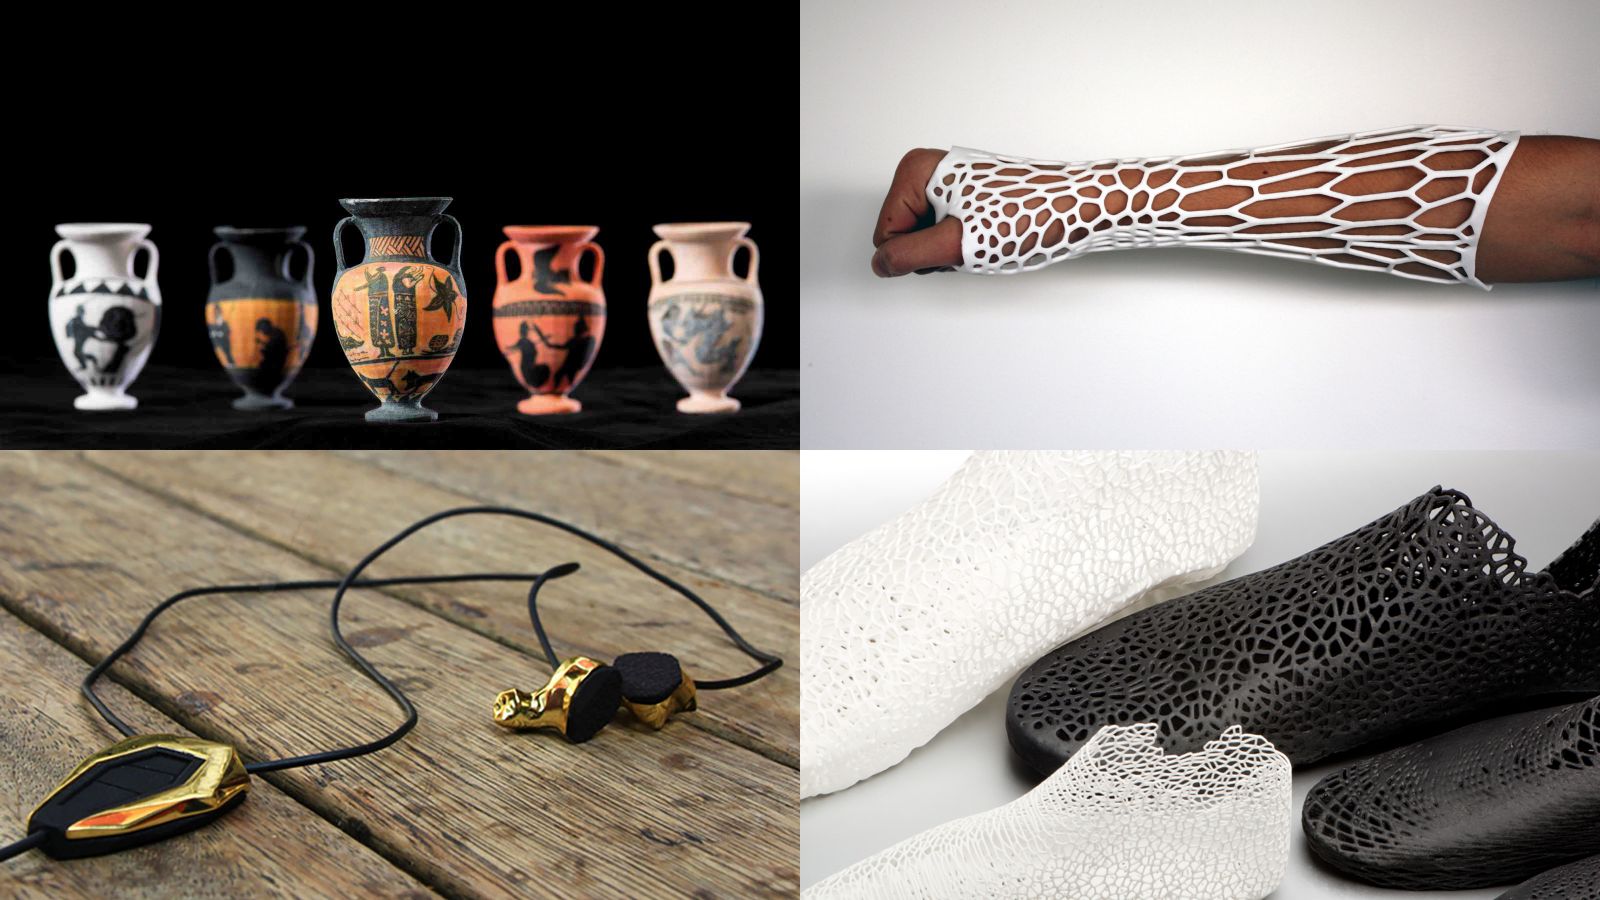 3d printed items: Clockwise from top left: Greek style amphorae by Dr Diana Burton, Bernard Guy, and Zach Challies; Cortex Cast by Jake Evill; custom-fitted shoes by Earl Stewart; headphones by Julian Goulding.